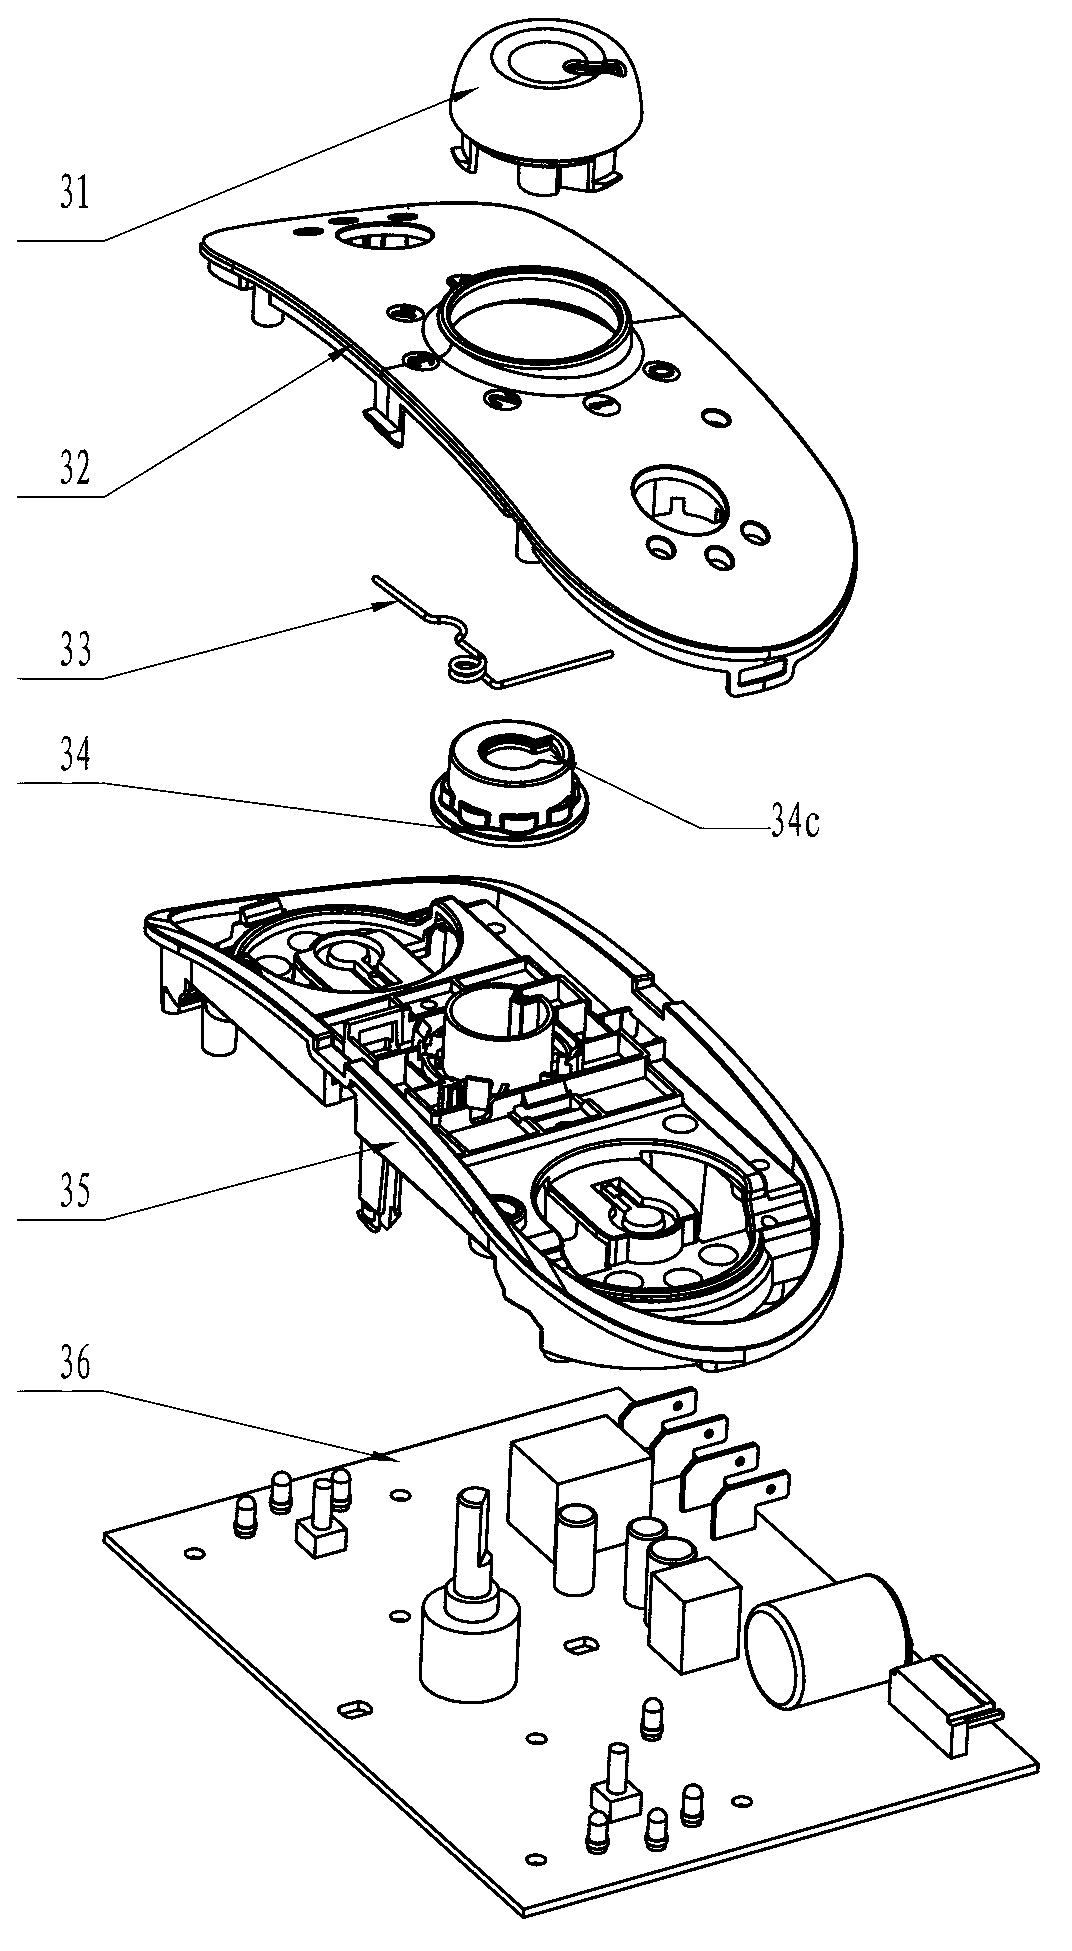 Function conversion device for kitchen electrical appliance